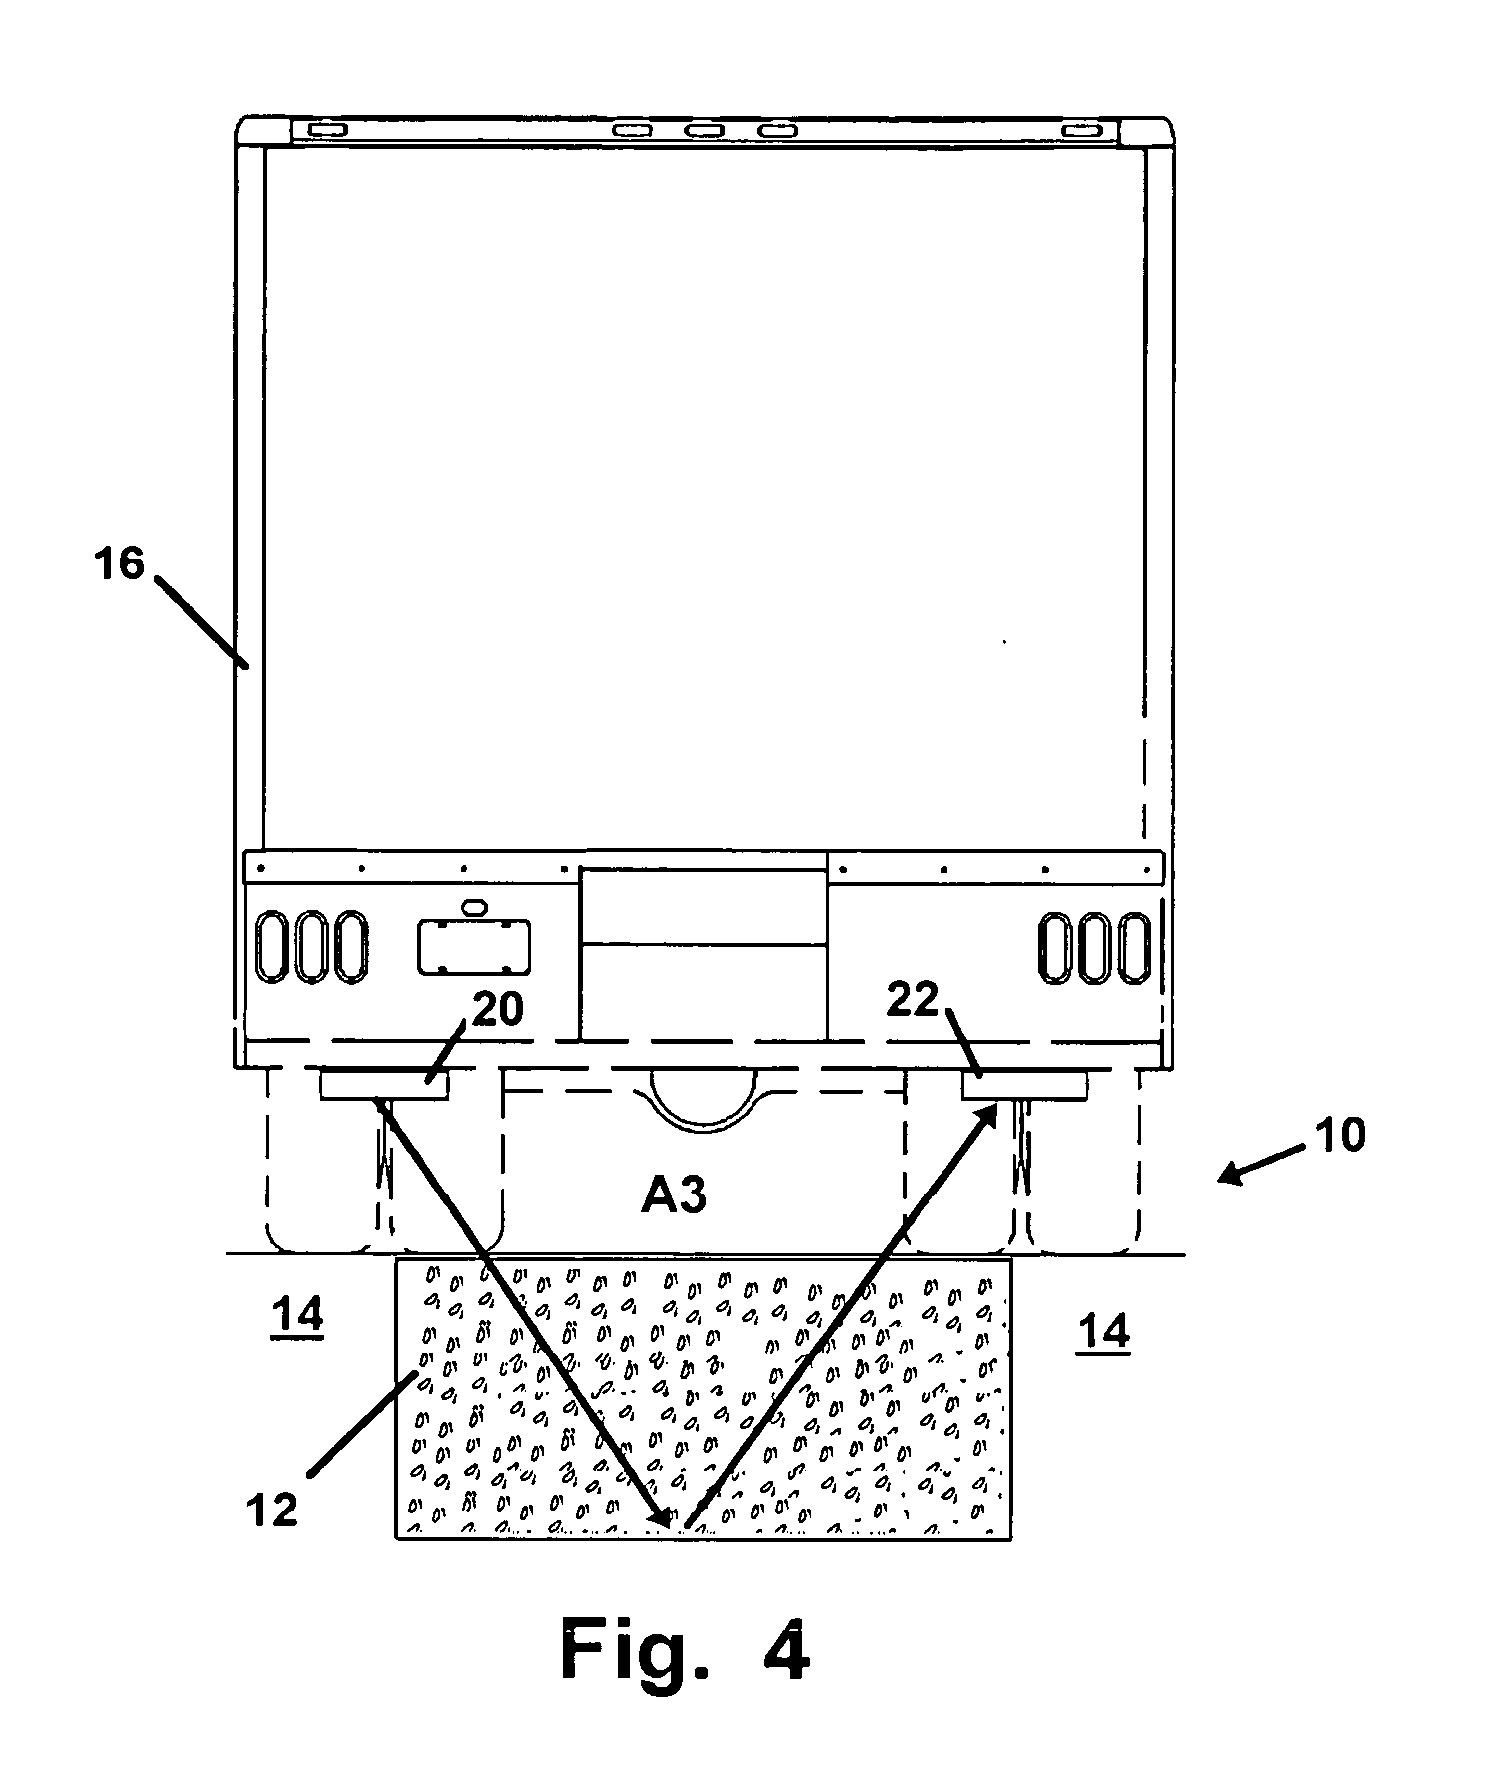 Device and Method to Evaluate Condition of Concrete Roadways Employing a Radar-based Sensing and Data Acquisition System